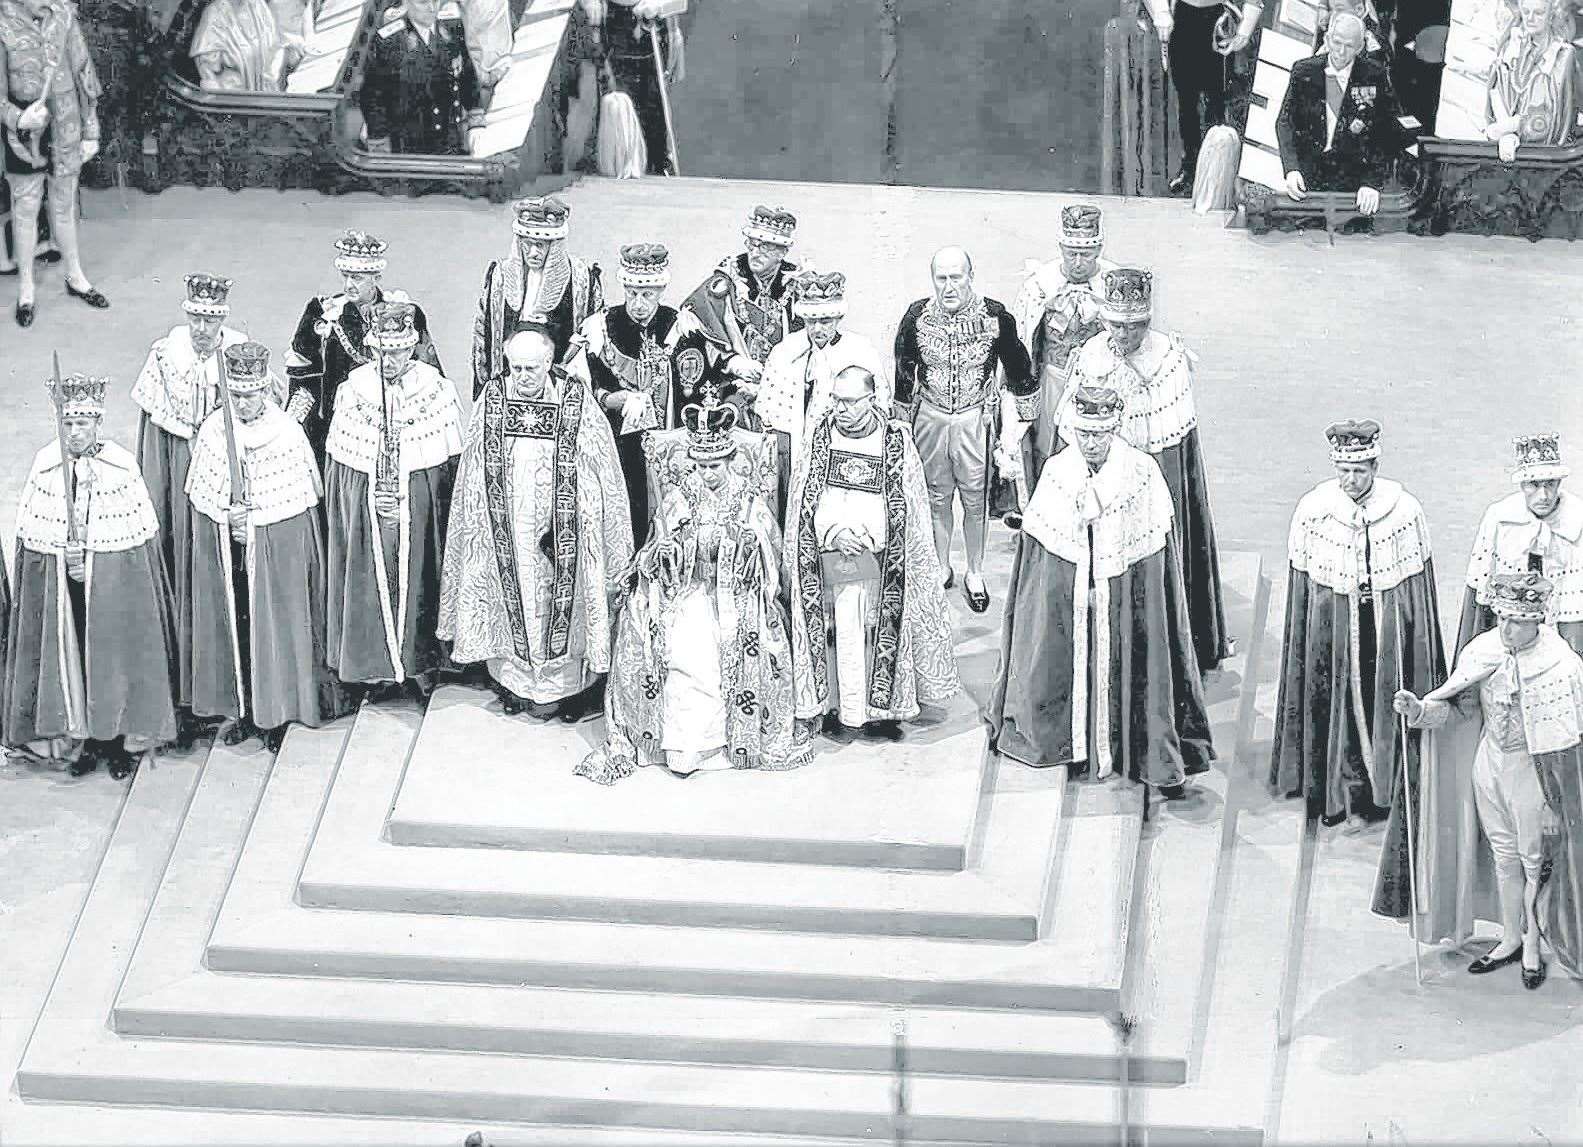 The Queen's Coronation was watched by millions on television